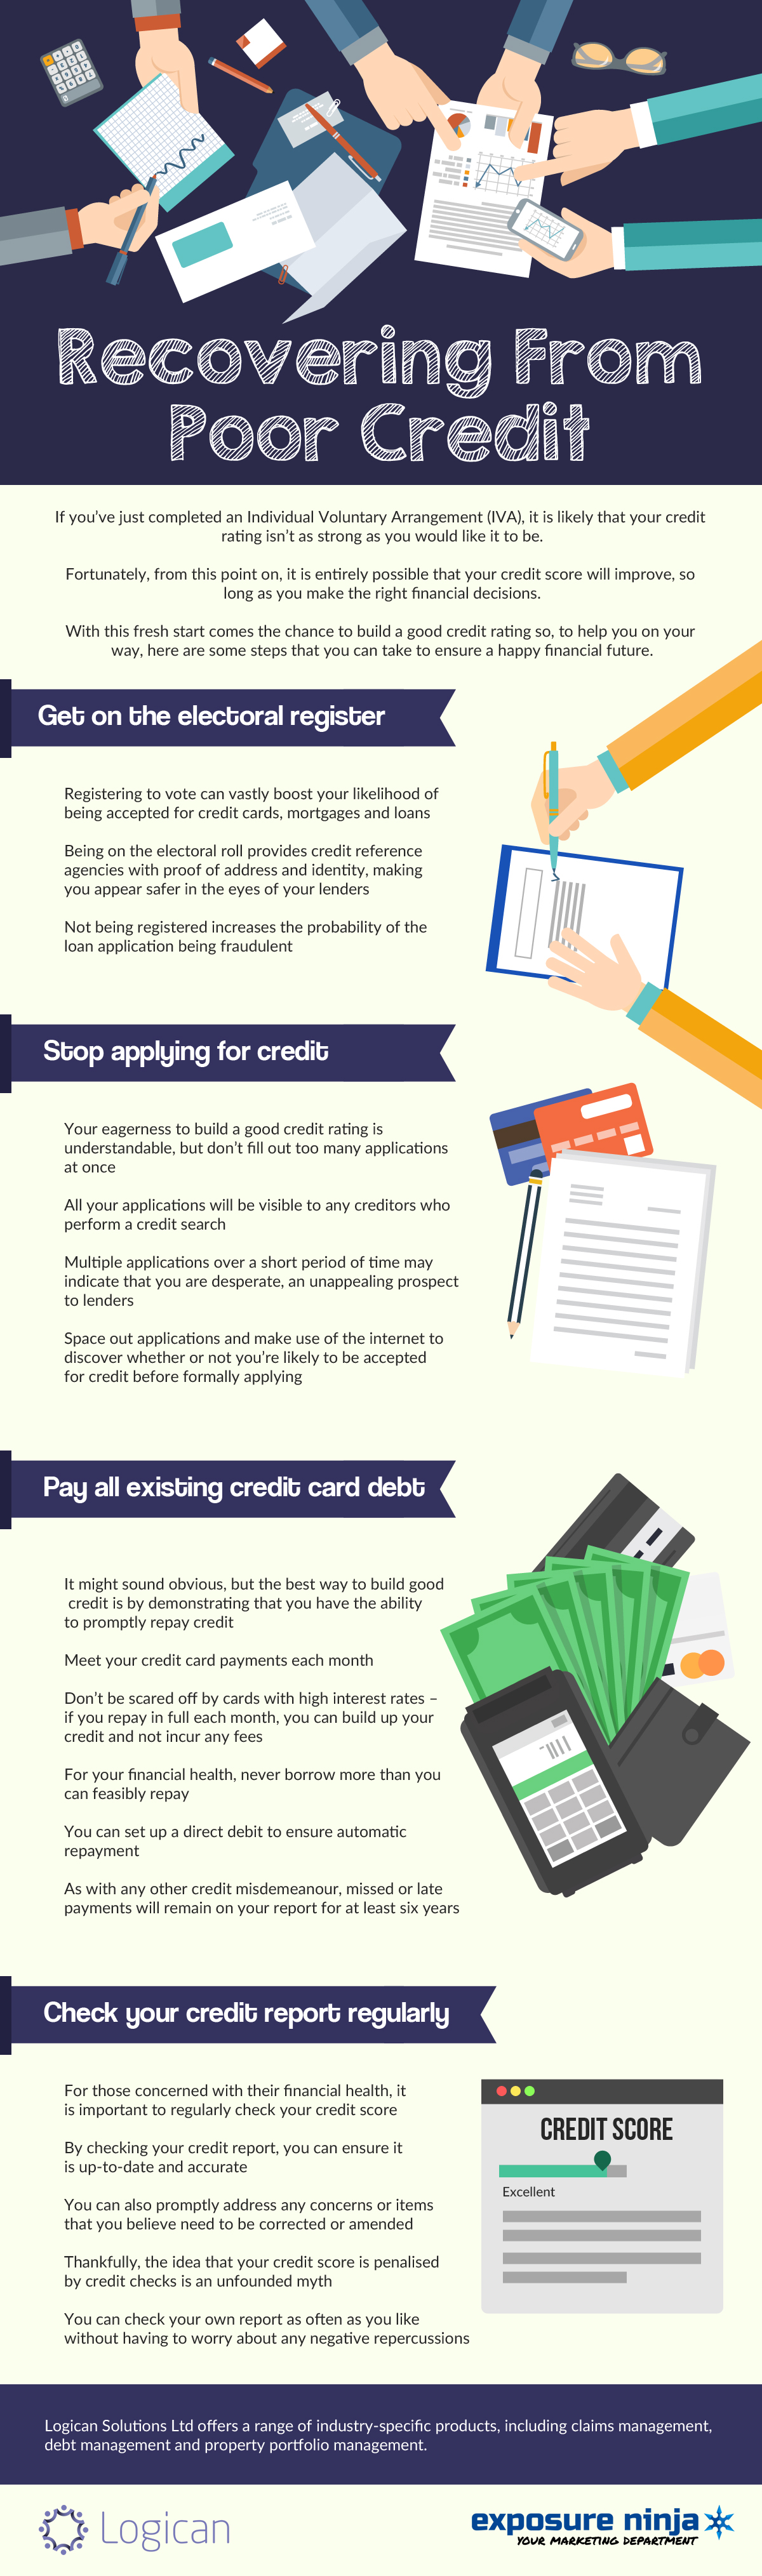 Recovering from poor credit infographic